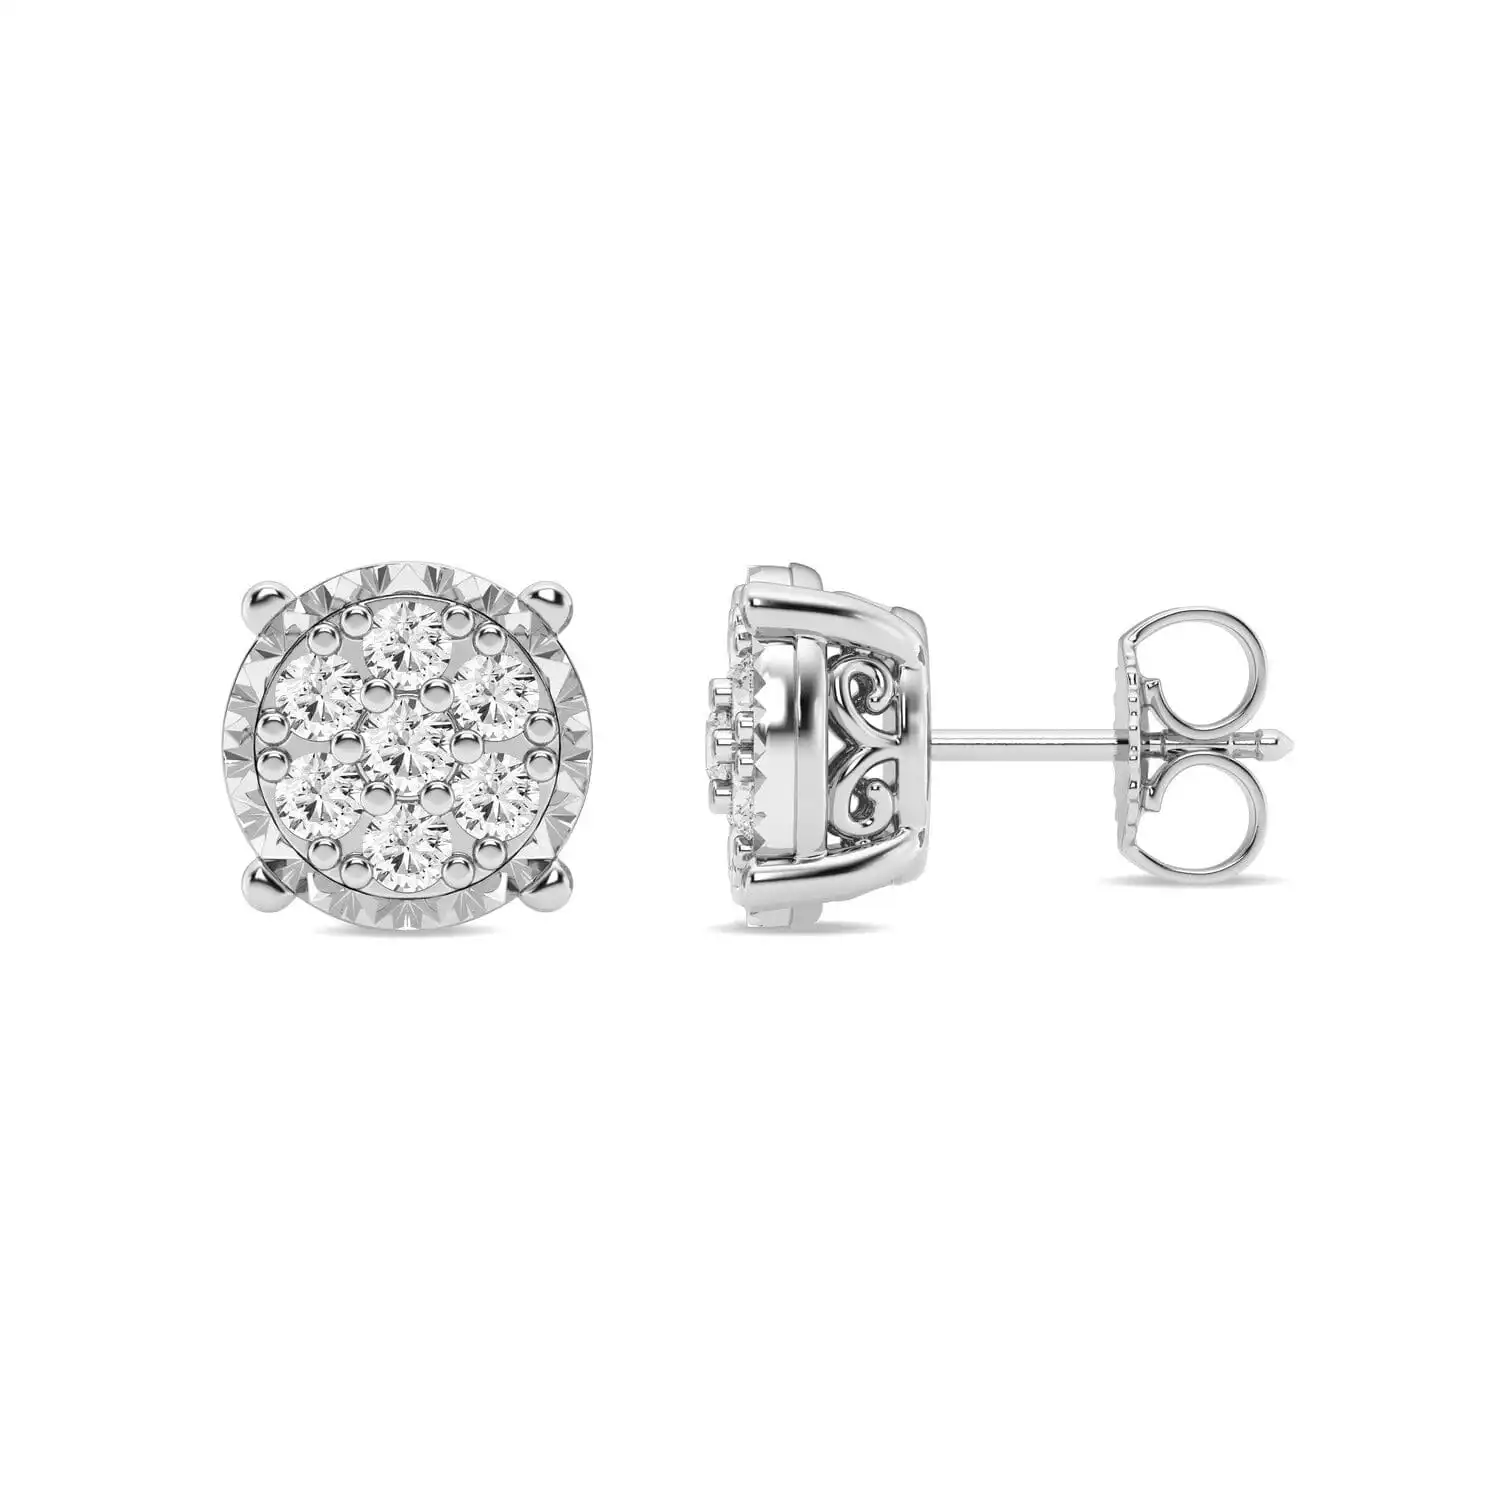 Meera Miracle Surround Earrings with 1/3ct of Laboratory Grown Diamonds in 9ct White Gold